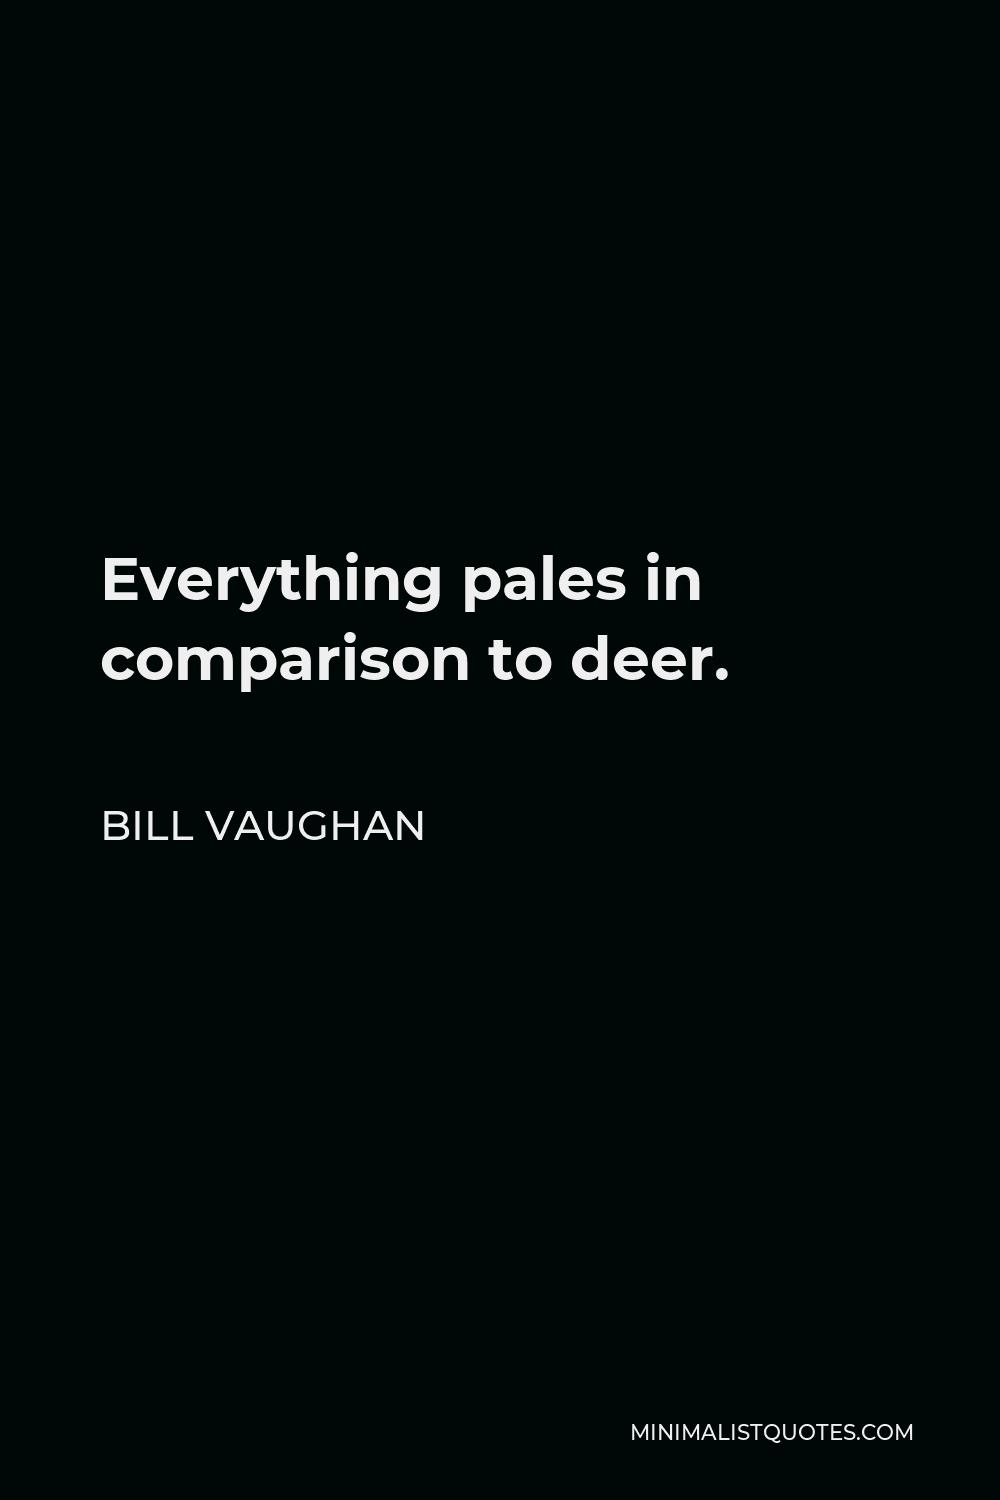 Bill Vaughan Quote - Everything pales in comparison to deer.